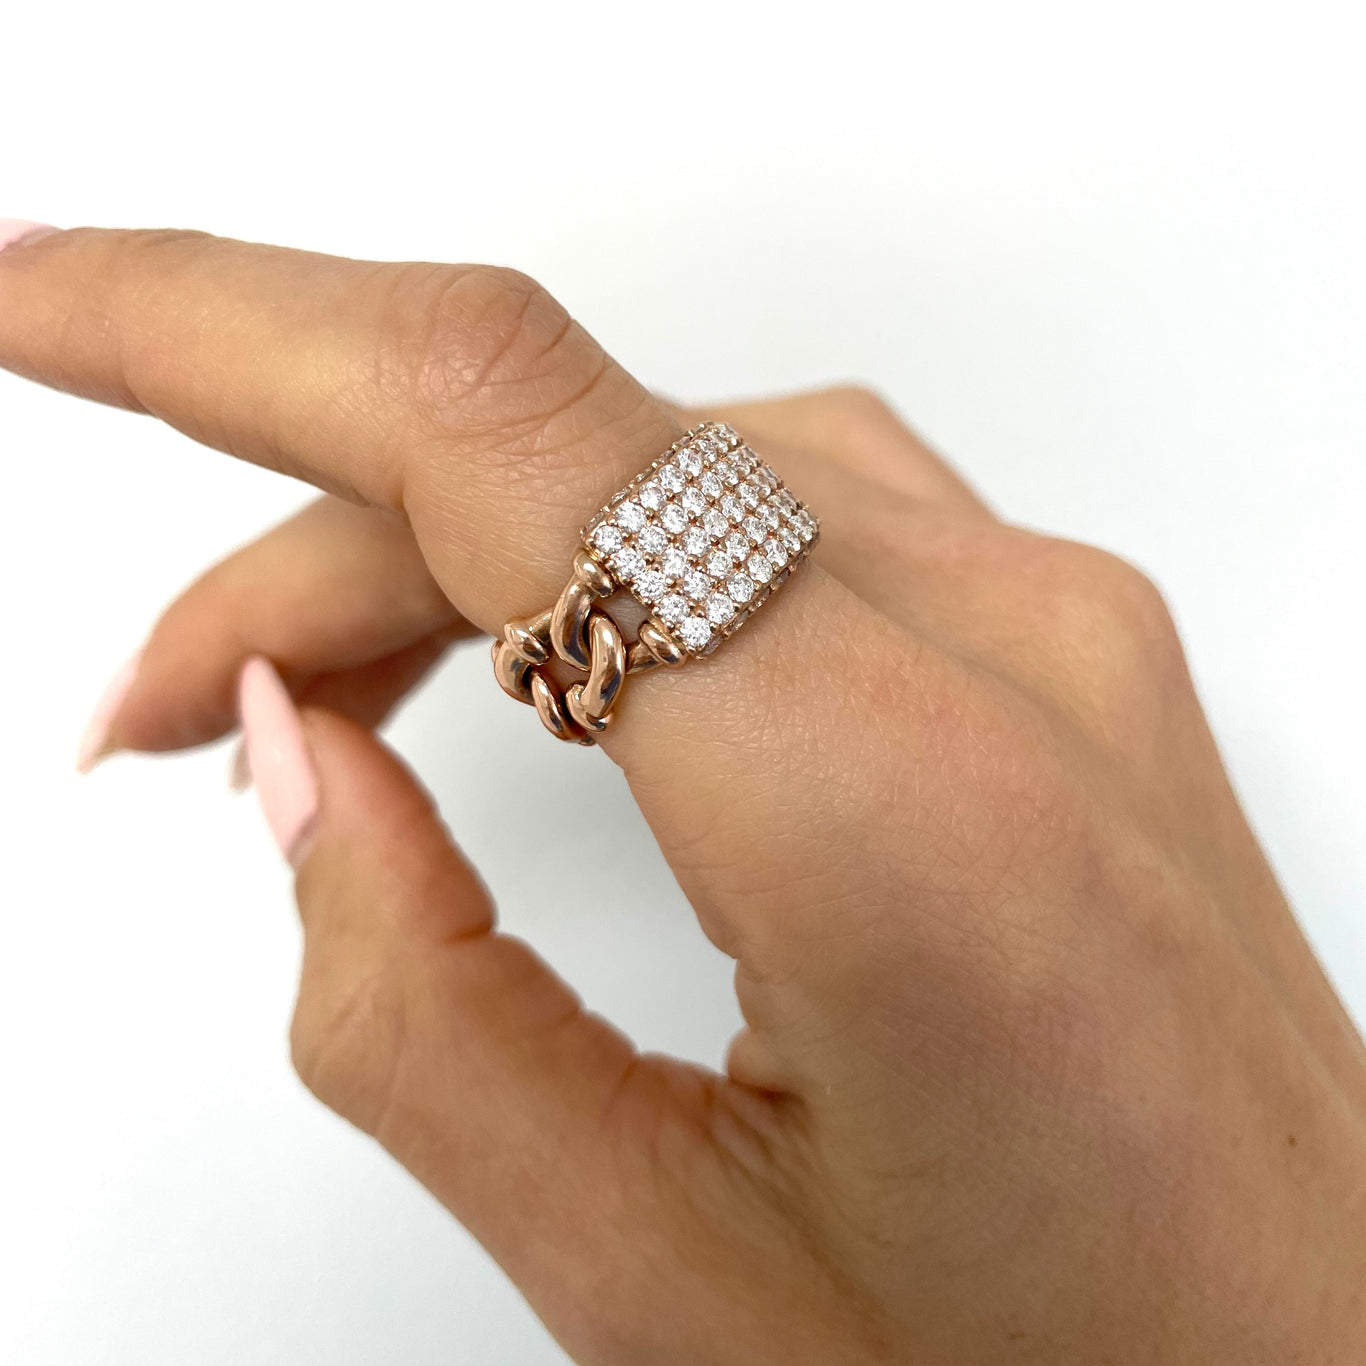 Diamond ID Link Ring shown in Rose Gold